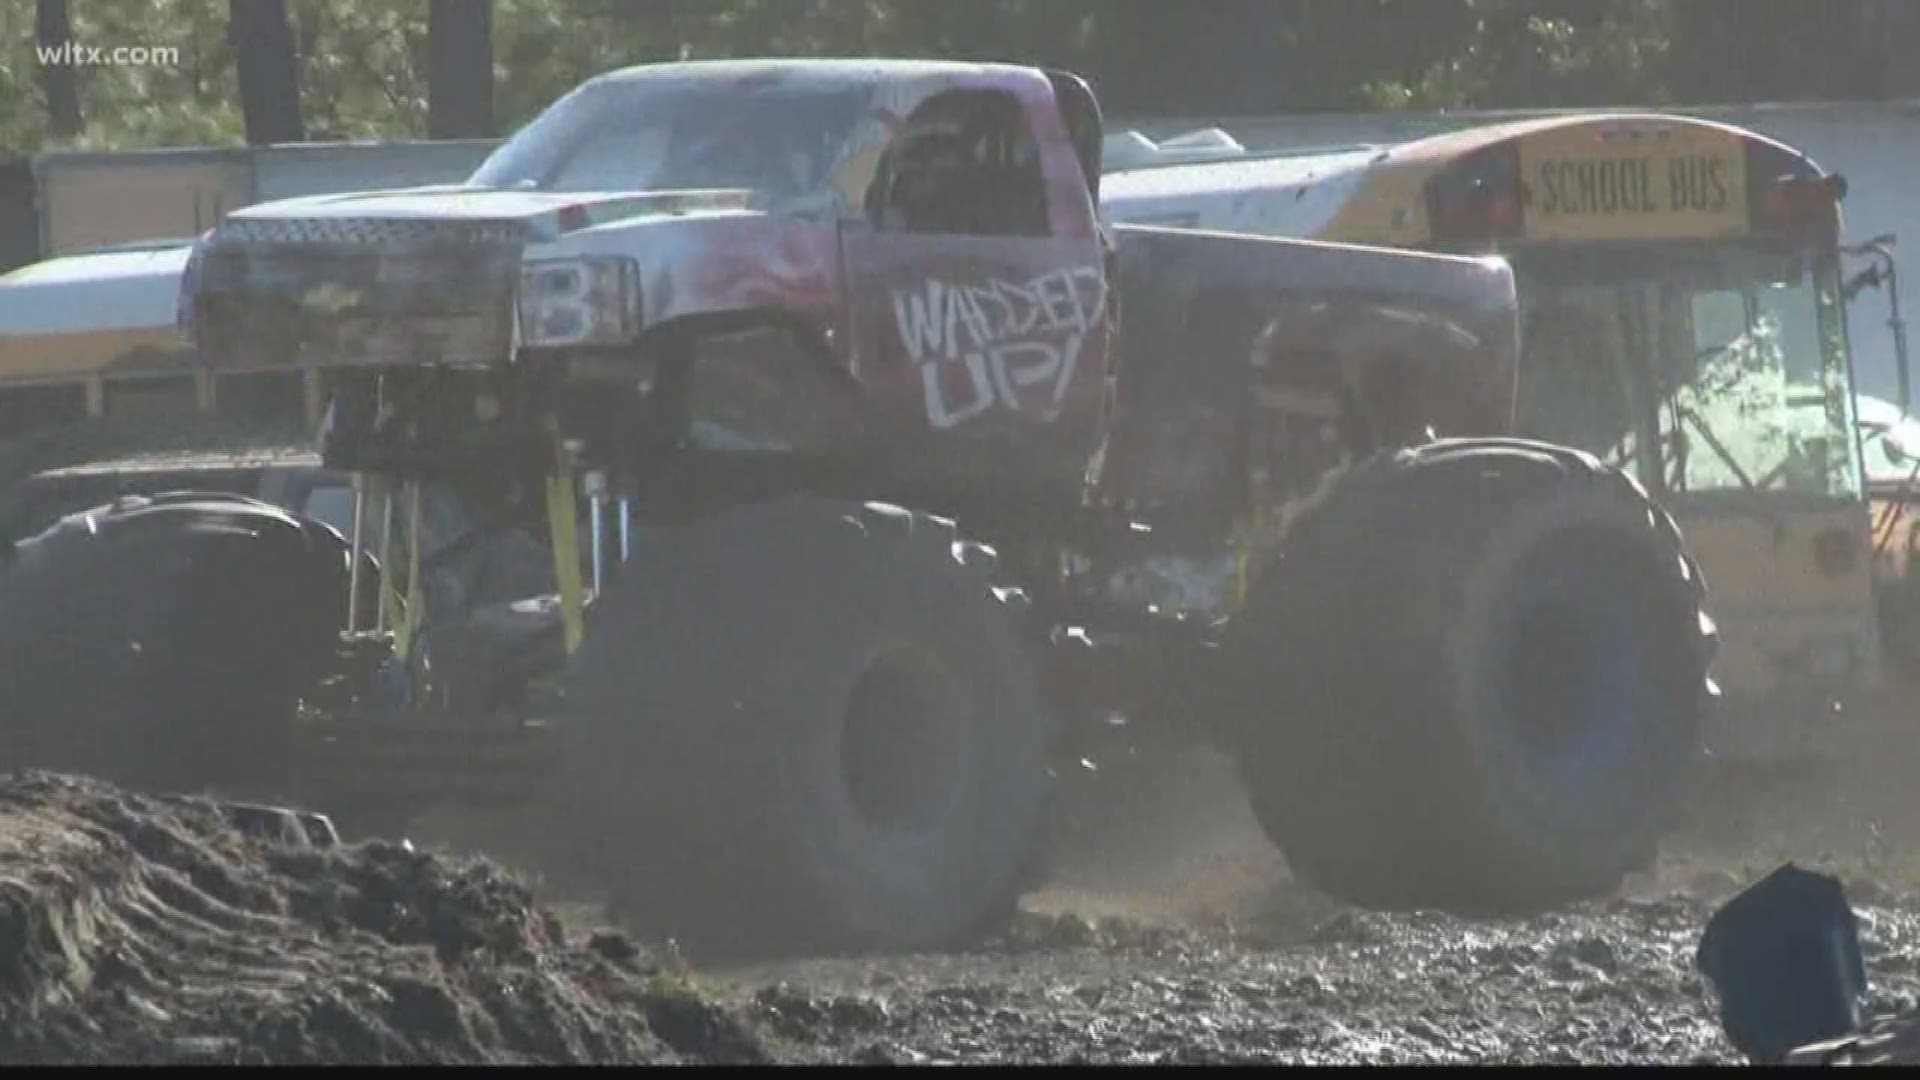 Monster truck festival held in Cayce, South Carolina